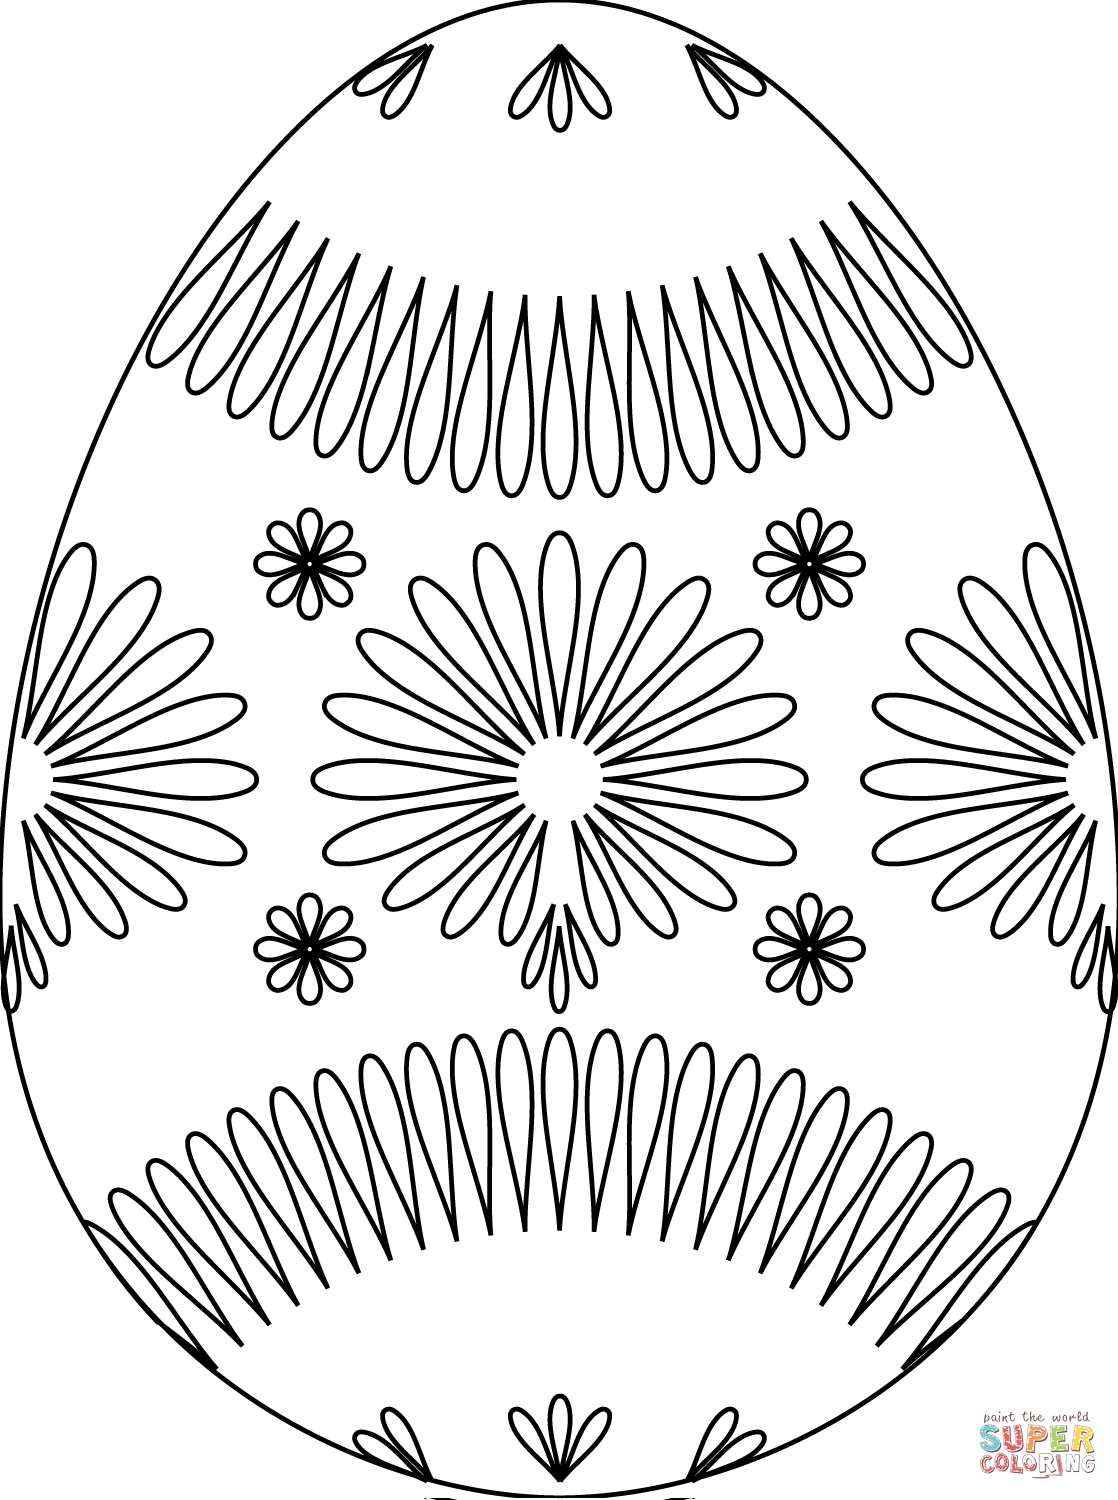 Easter Egg with Flower Pattern coloring page | Free Printable ...